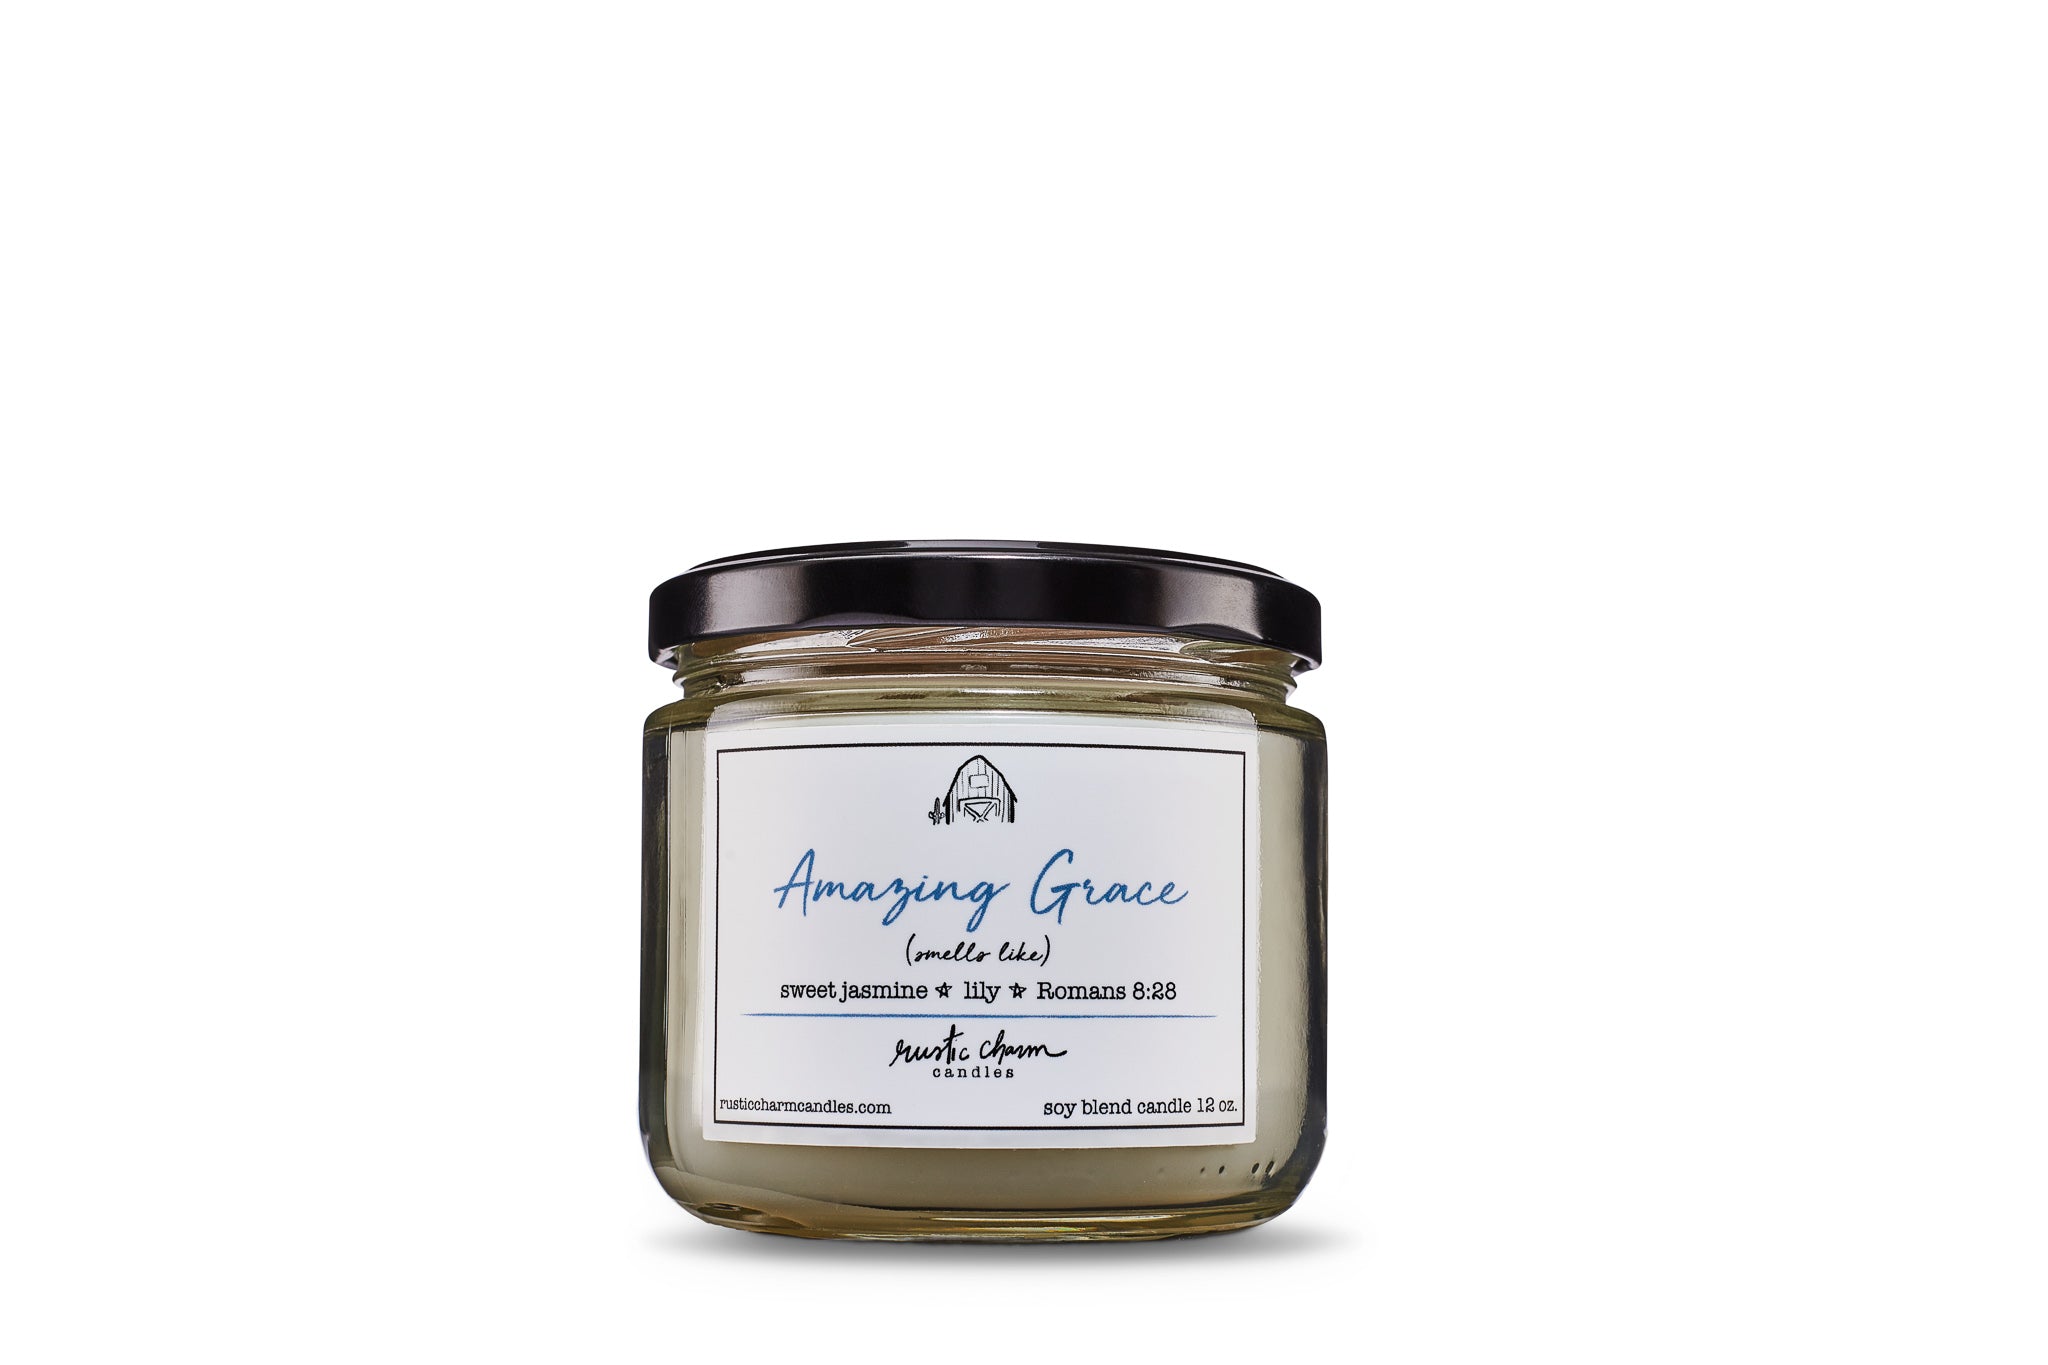 Amazing Grace Room & Car Sprays  Rustic Charm Candles Hand Poured